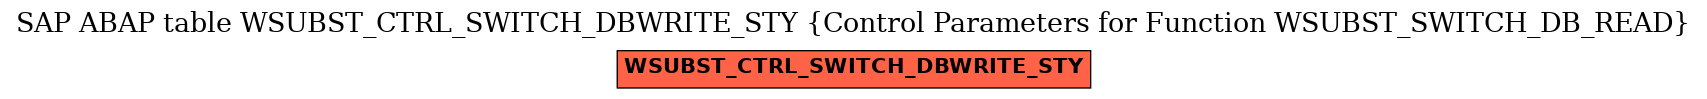 E-R Diagram for table WSUBST_CTRL_SWITCH_DBWRITE_STY (Control Parameters for Function WSUBST_SWITCH_DB_READ)